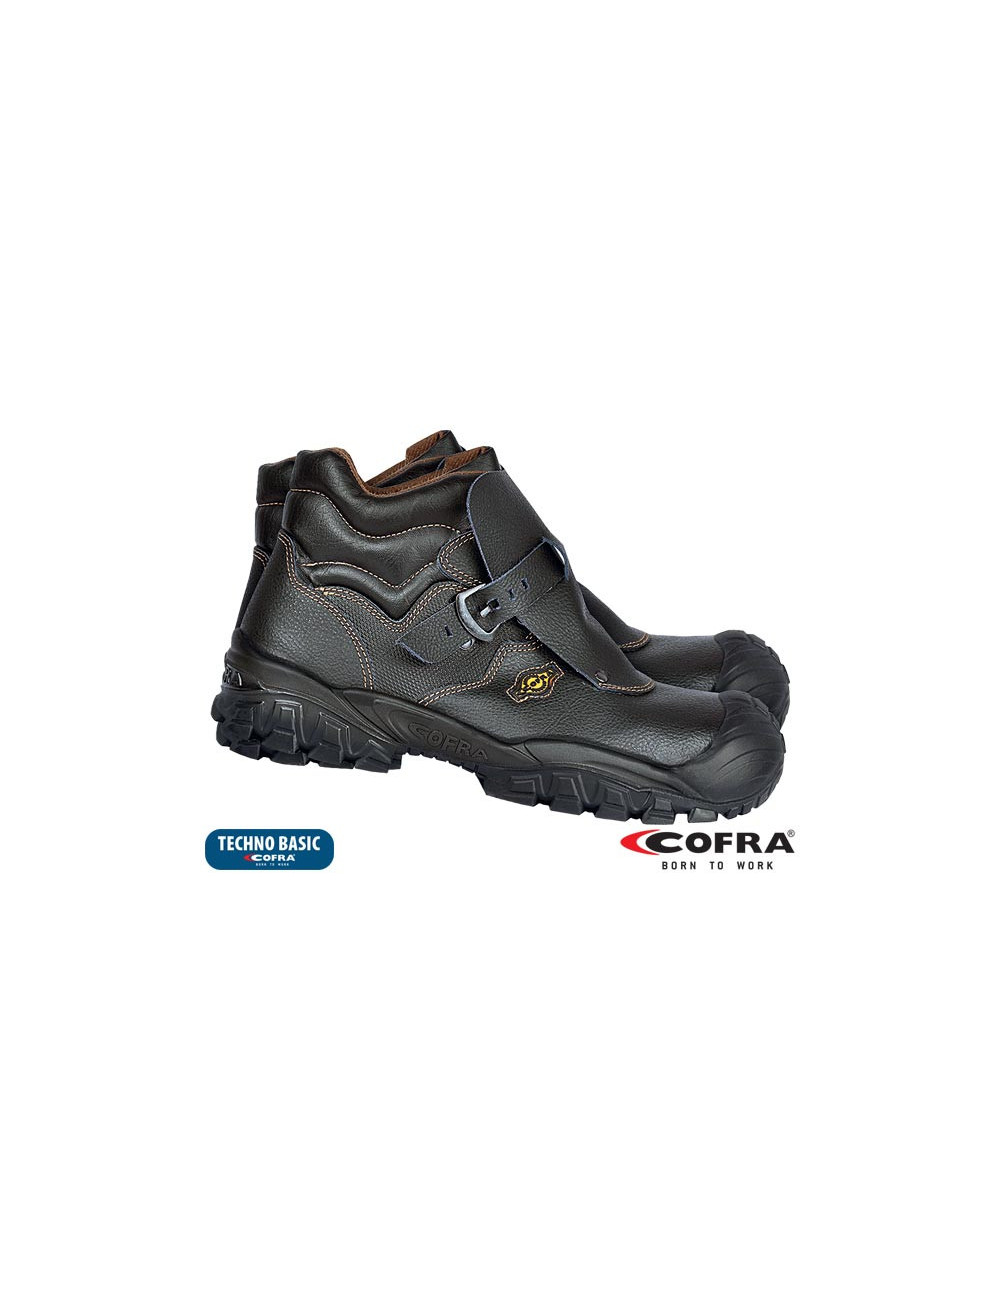 Brc-tago safety shoes Cofra